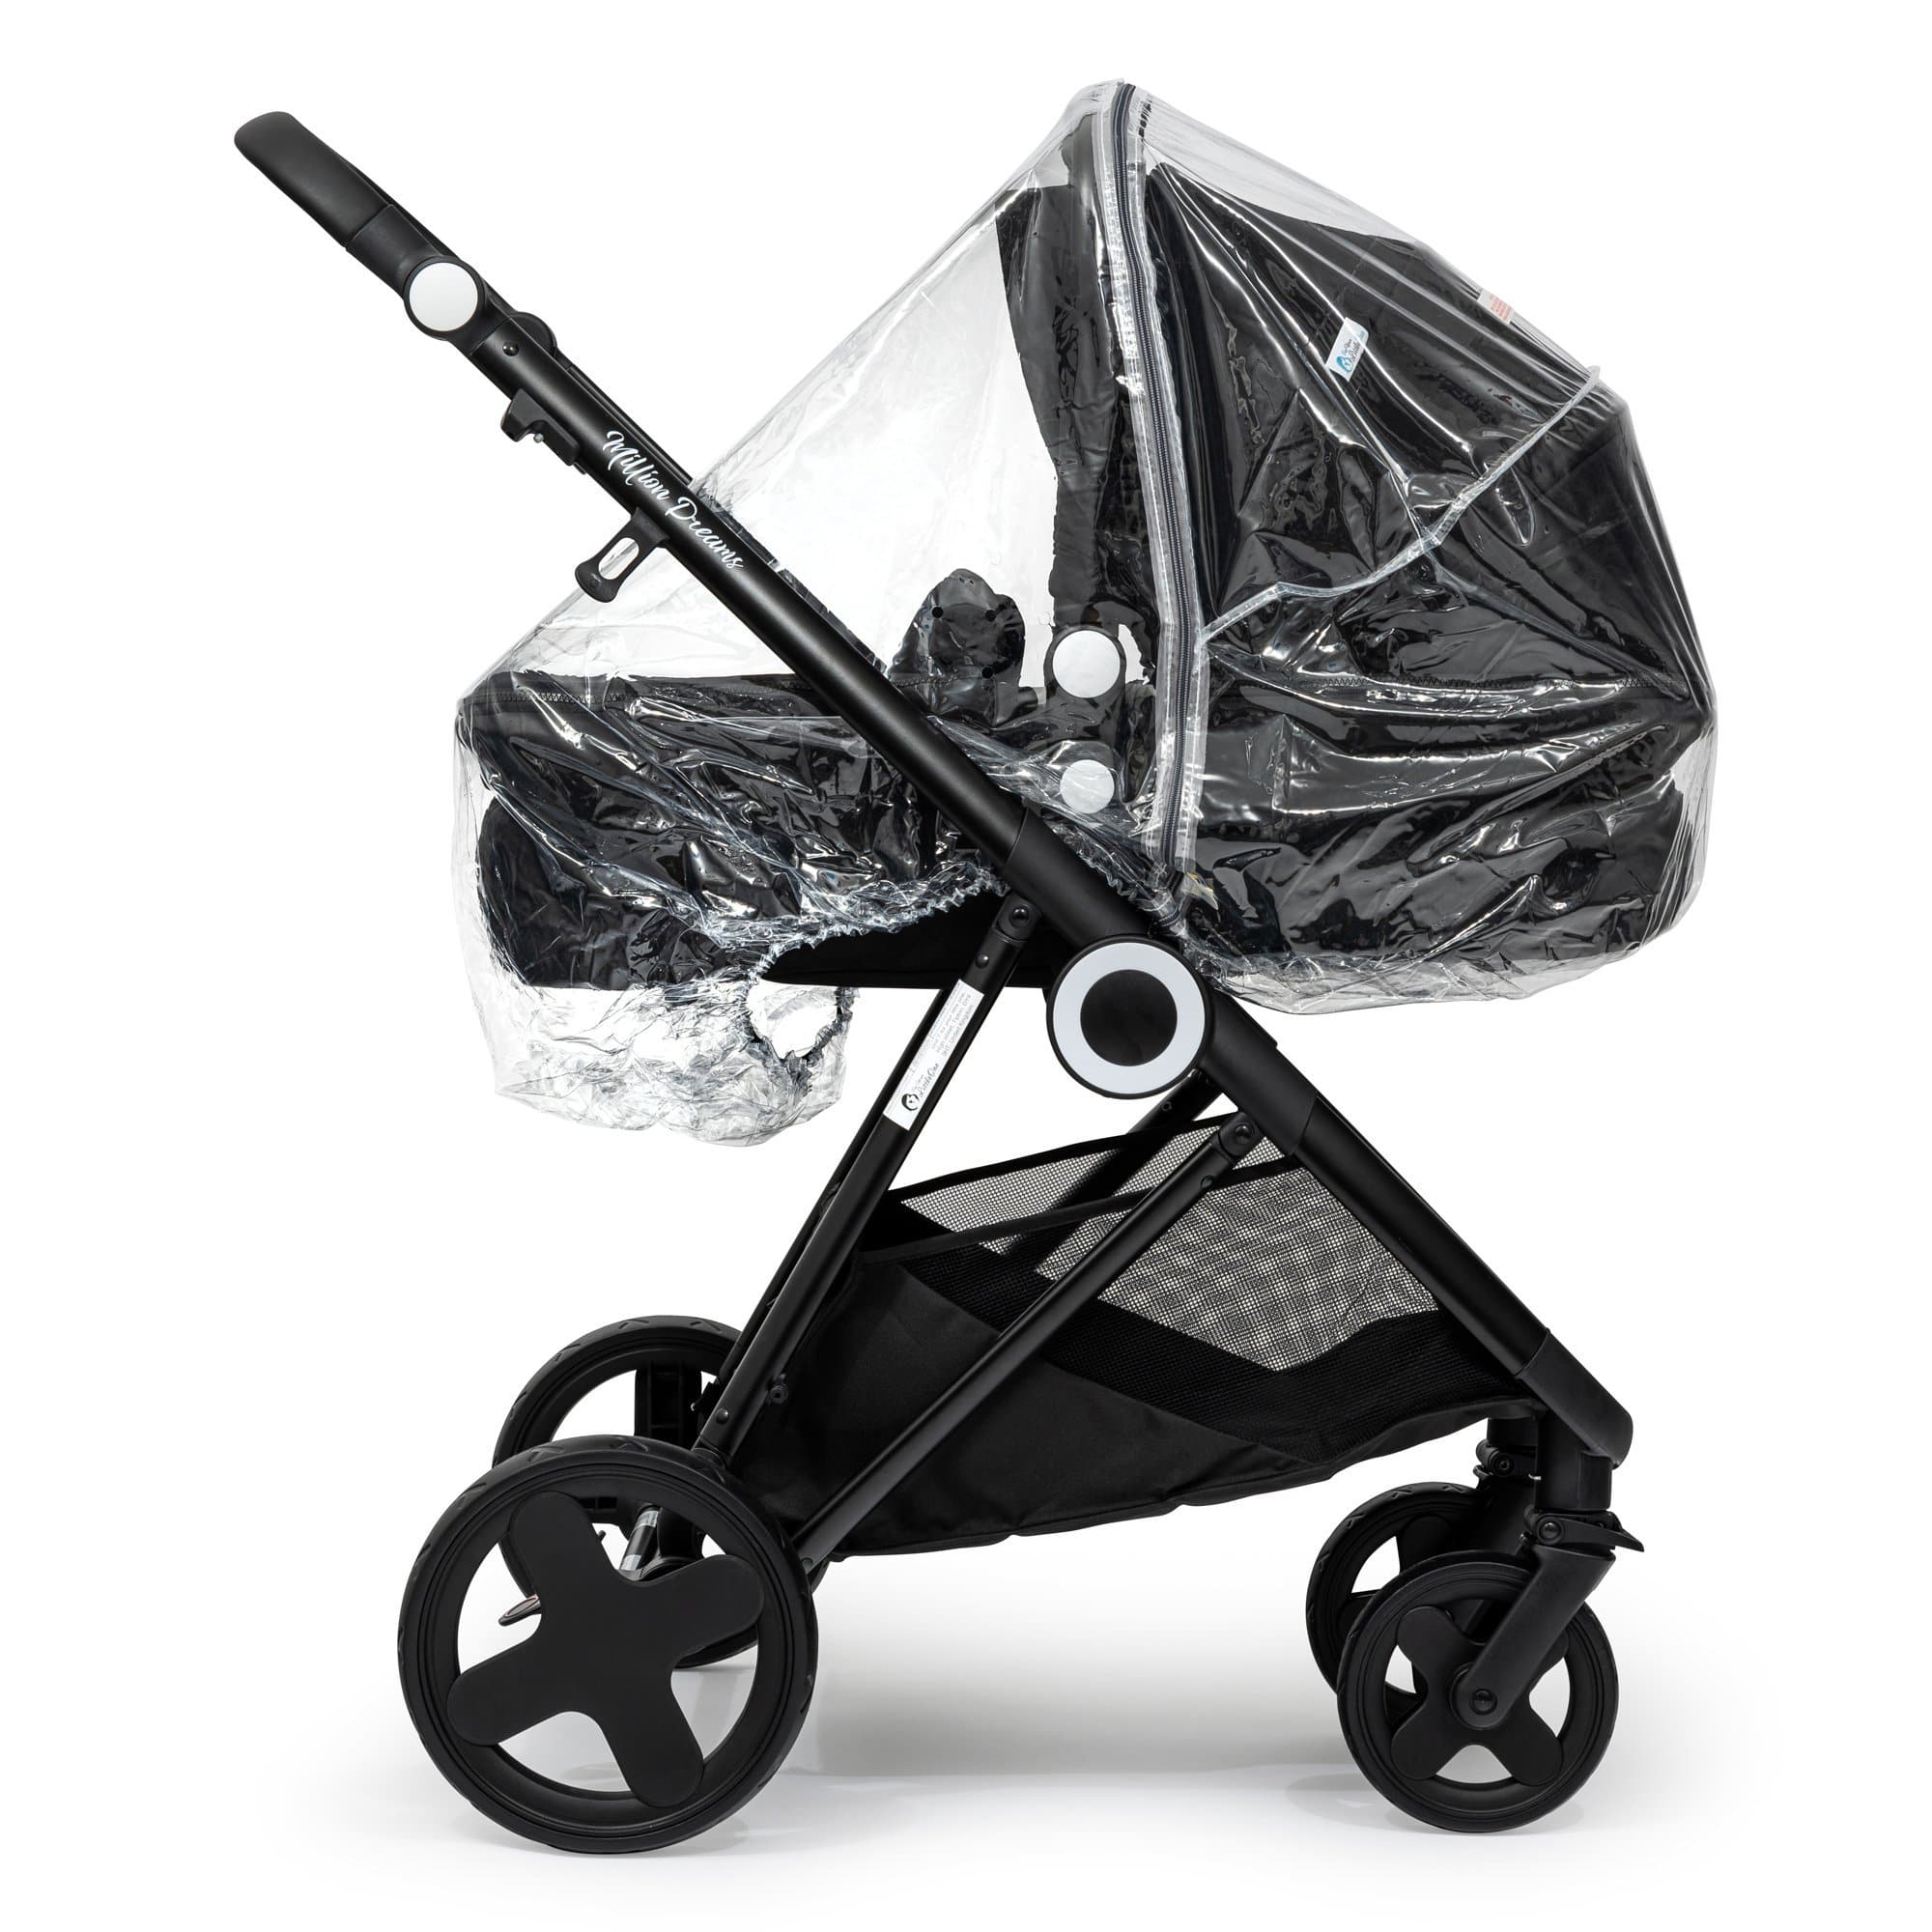 2 in 1 Rain Cover Compatible with Babyzen - Fits All Models -  | For Your Little One